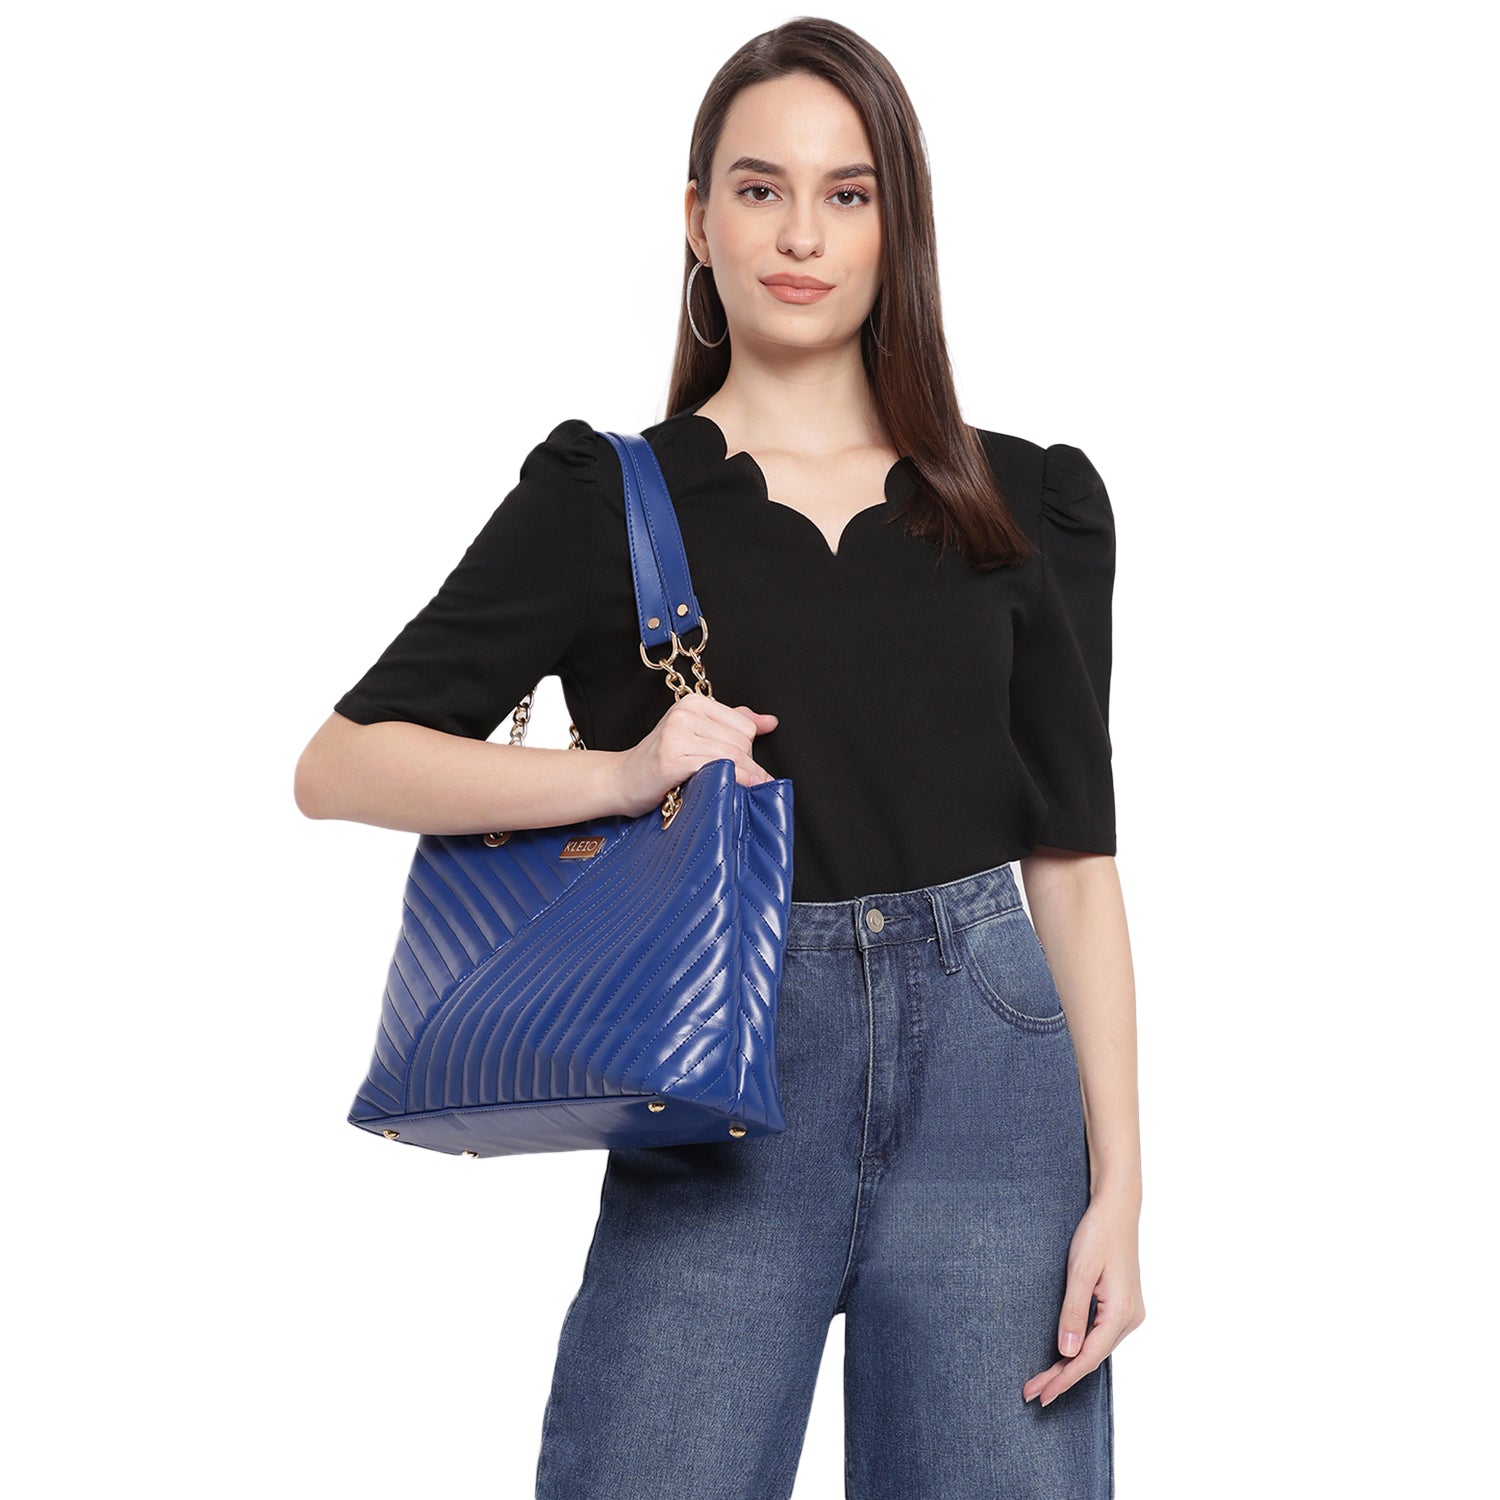 Iris Quilted Chain Handle Tote